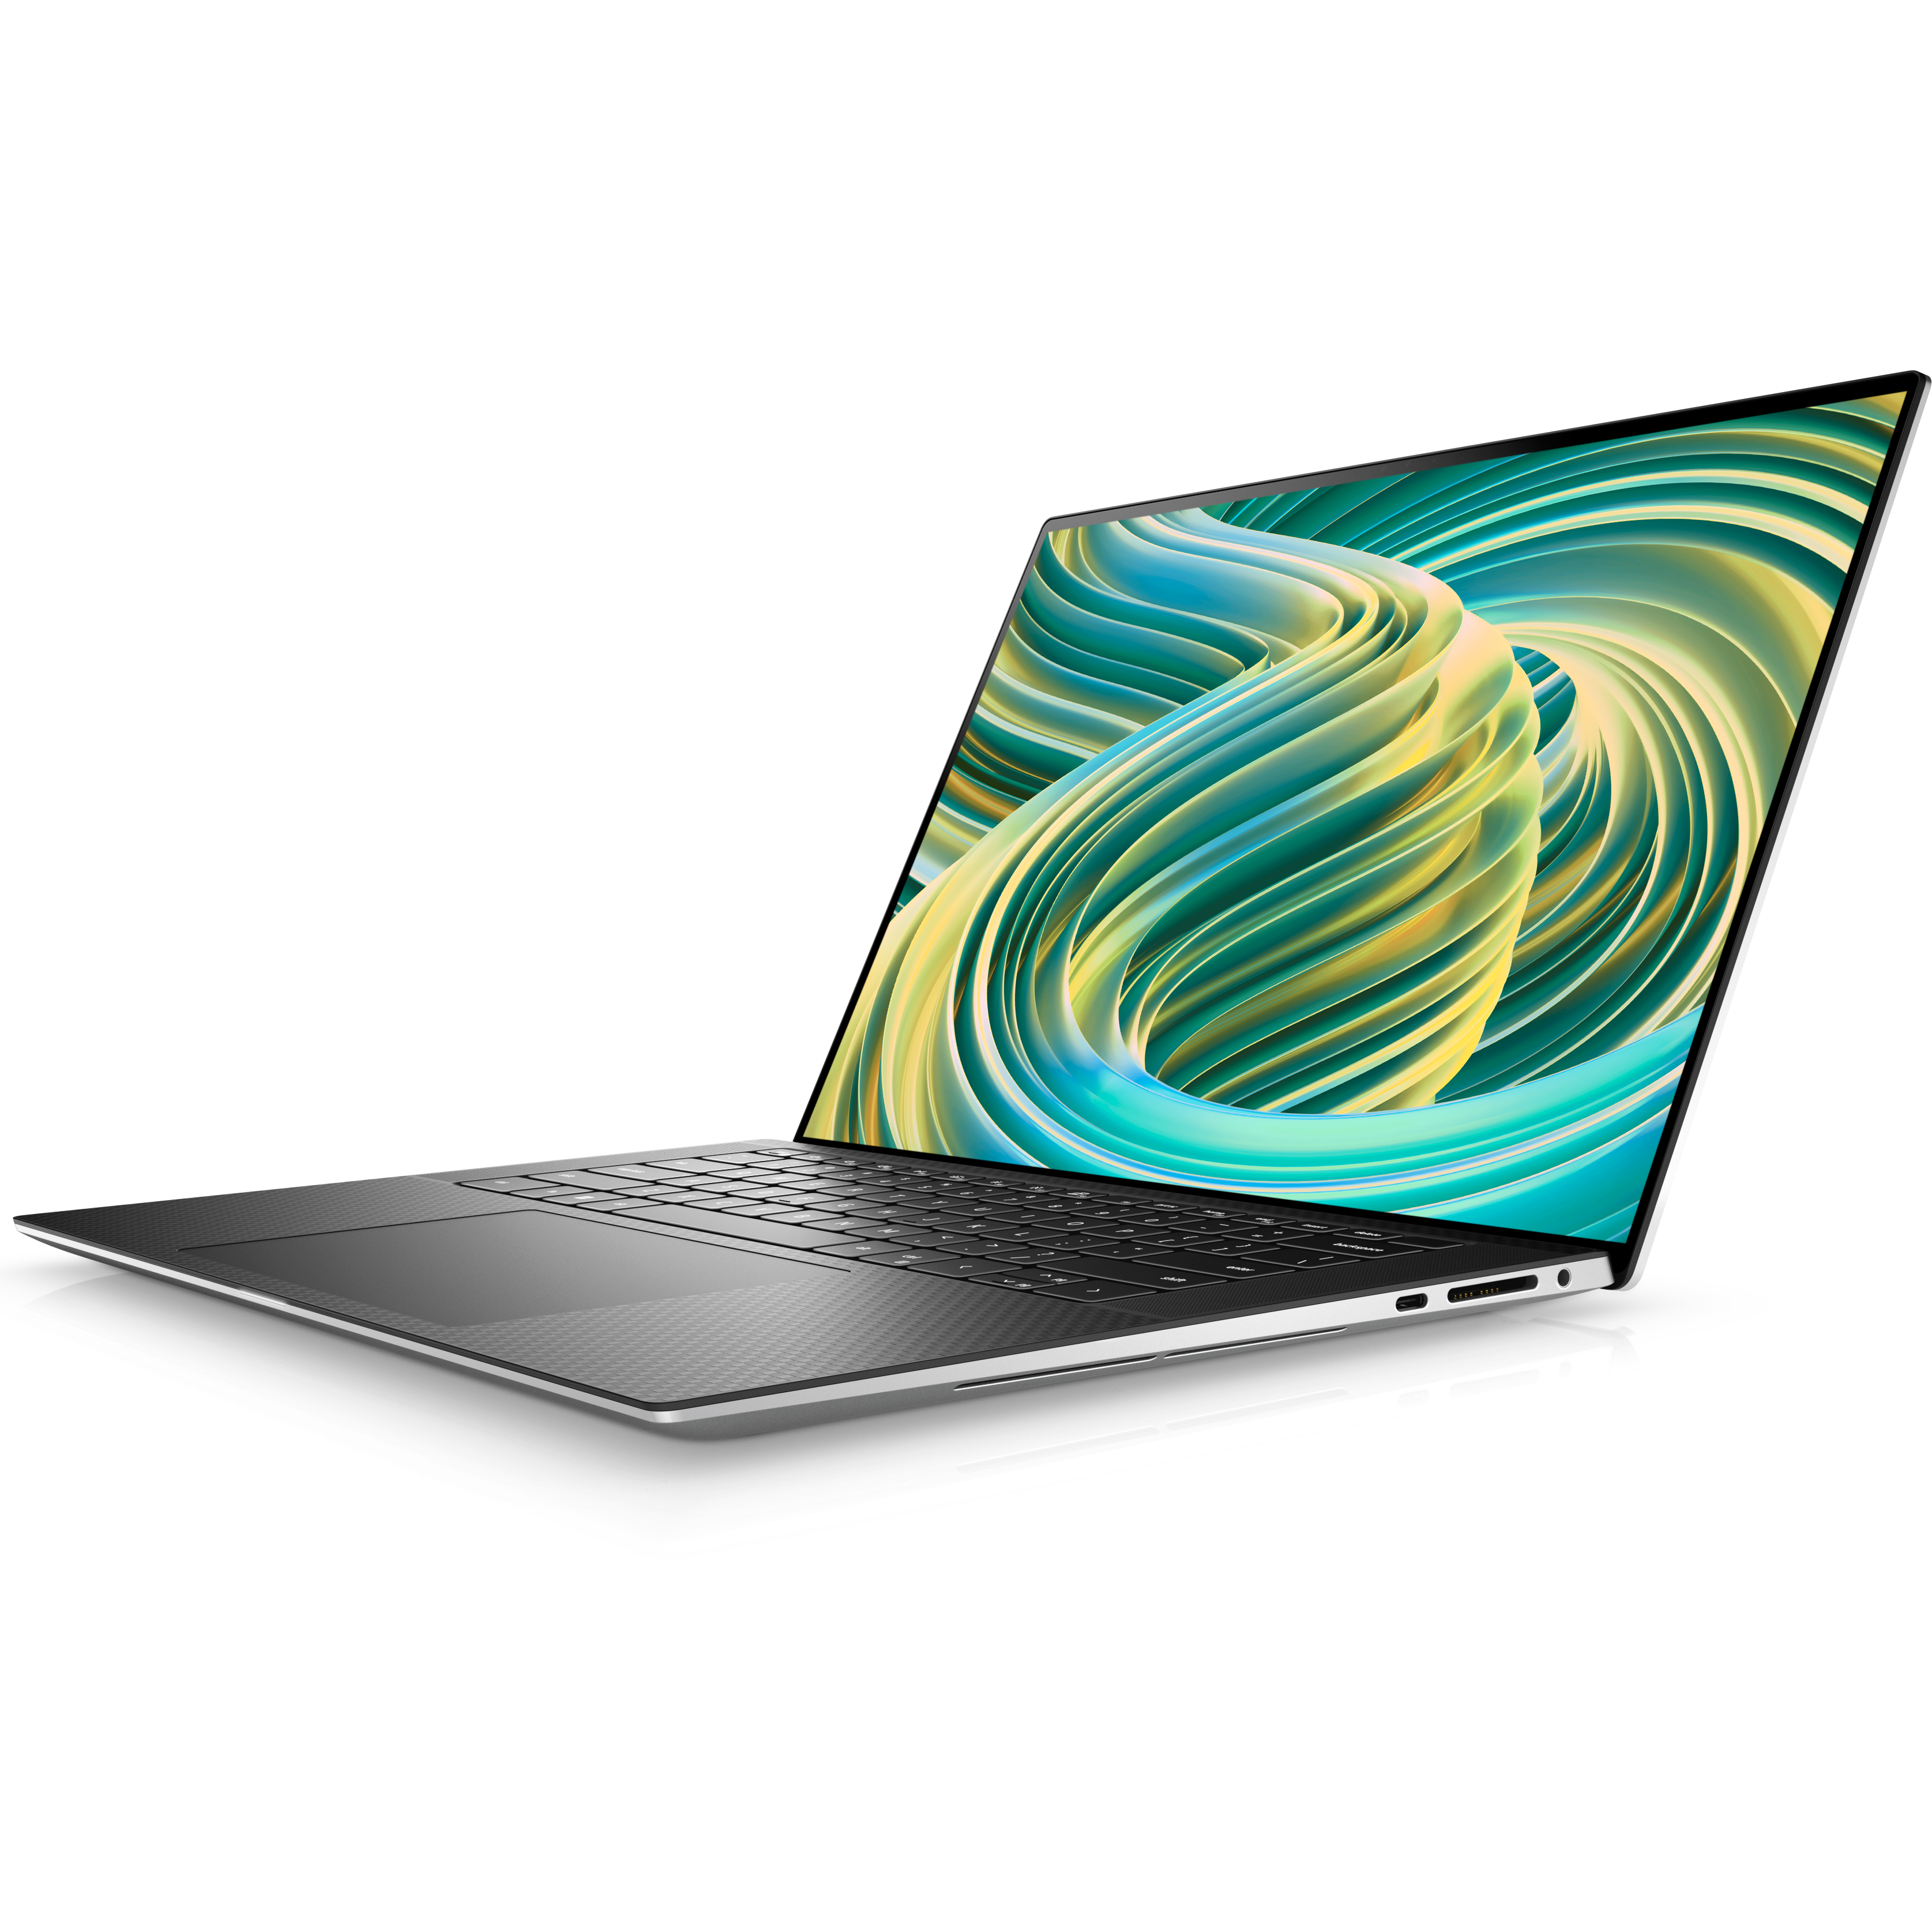 Angled front view of the Dell XPS 15 facing left